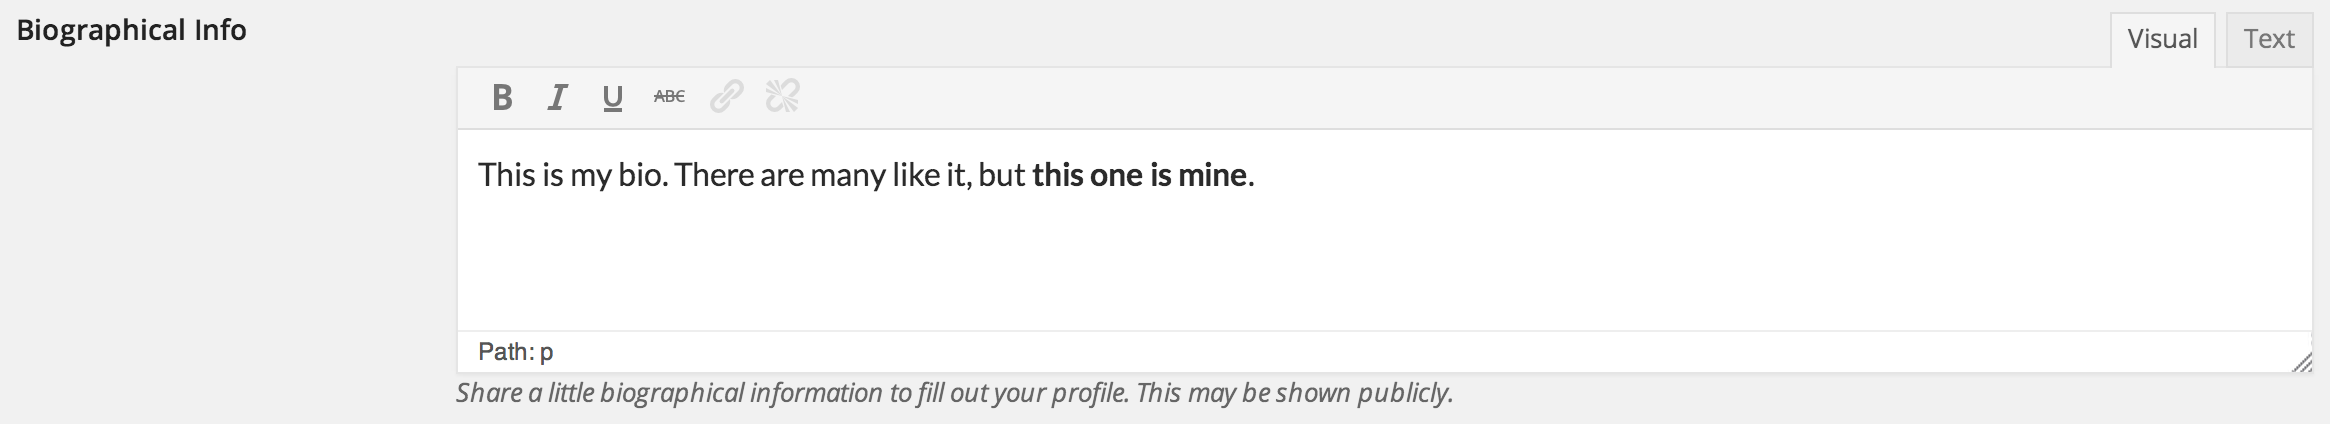 TinyMCE editor on user profile page. This is optional, but enabled by default.